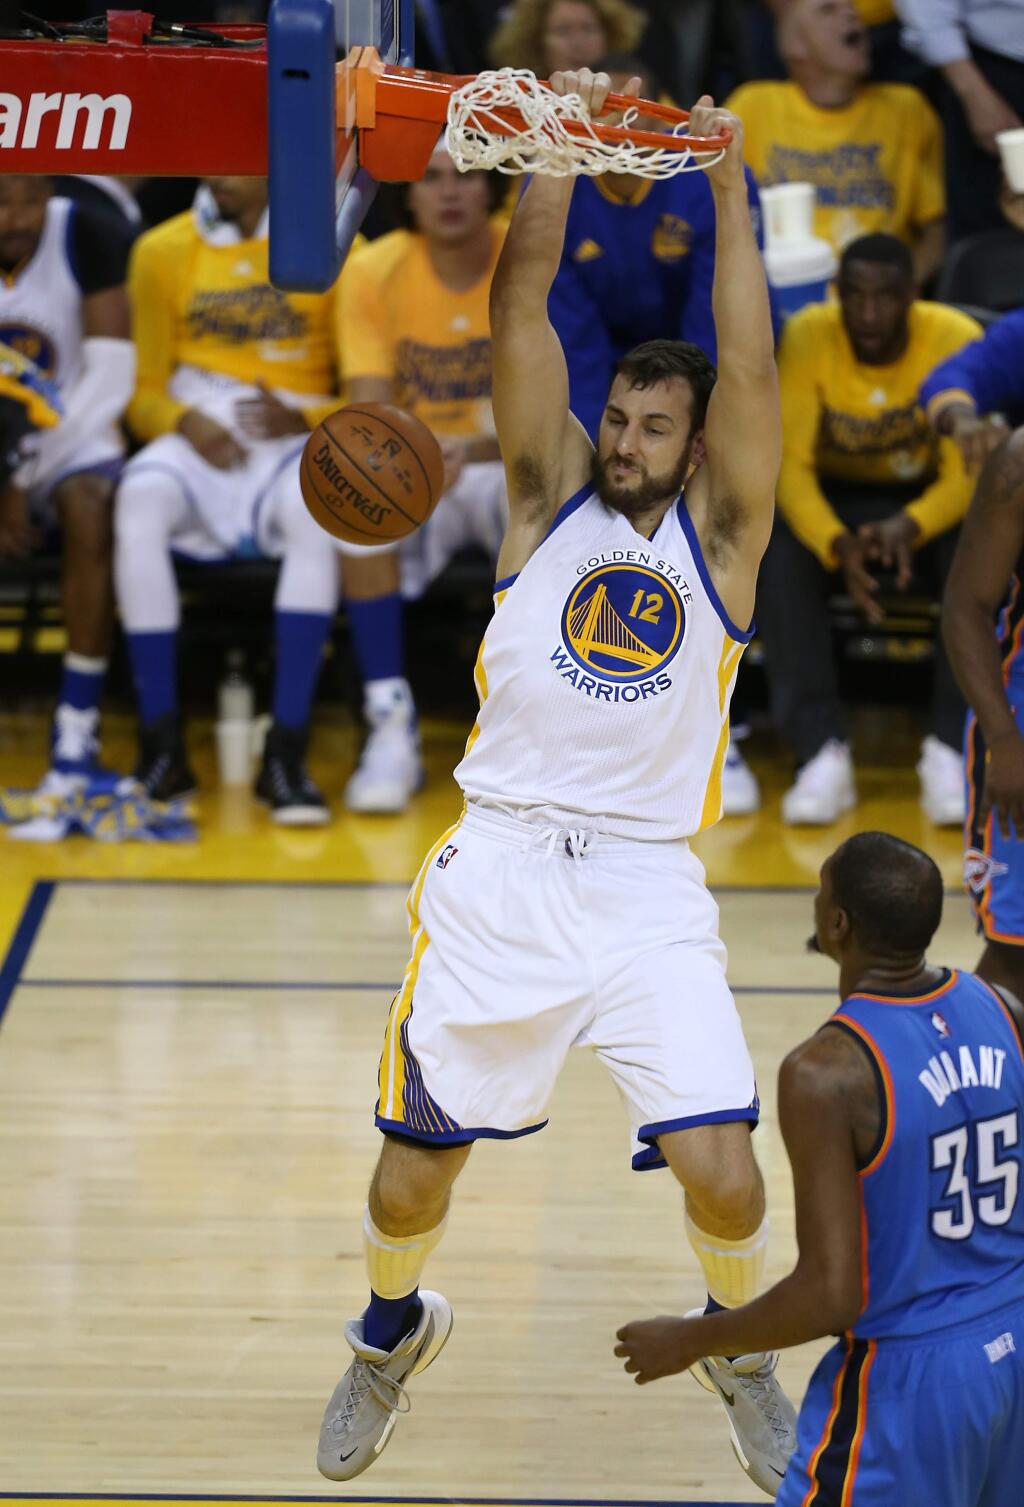 Golden State Warriors' Andrew Bogut throws down a dunk against the Oklahoma City Thunder, during their game in Oakland on Thursday, May 26, 2016. (Christopher Chung/ The Press Democrat)